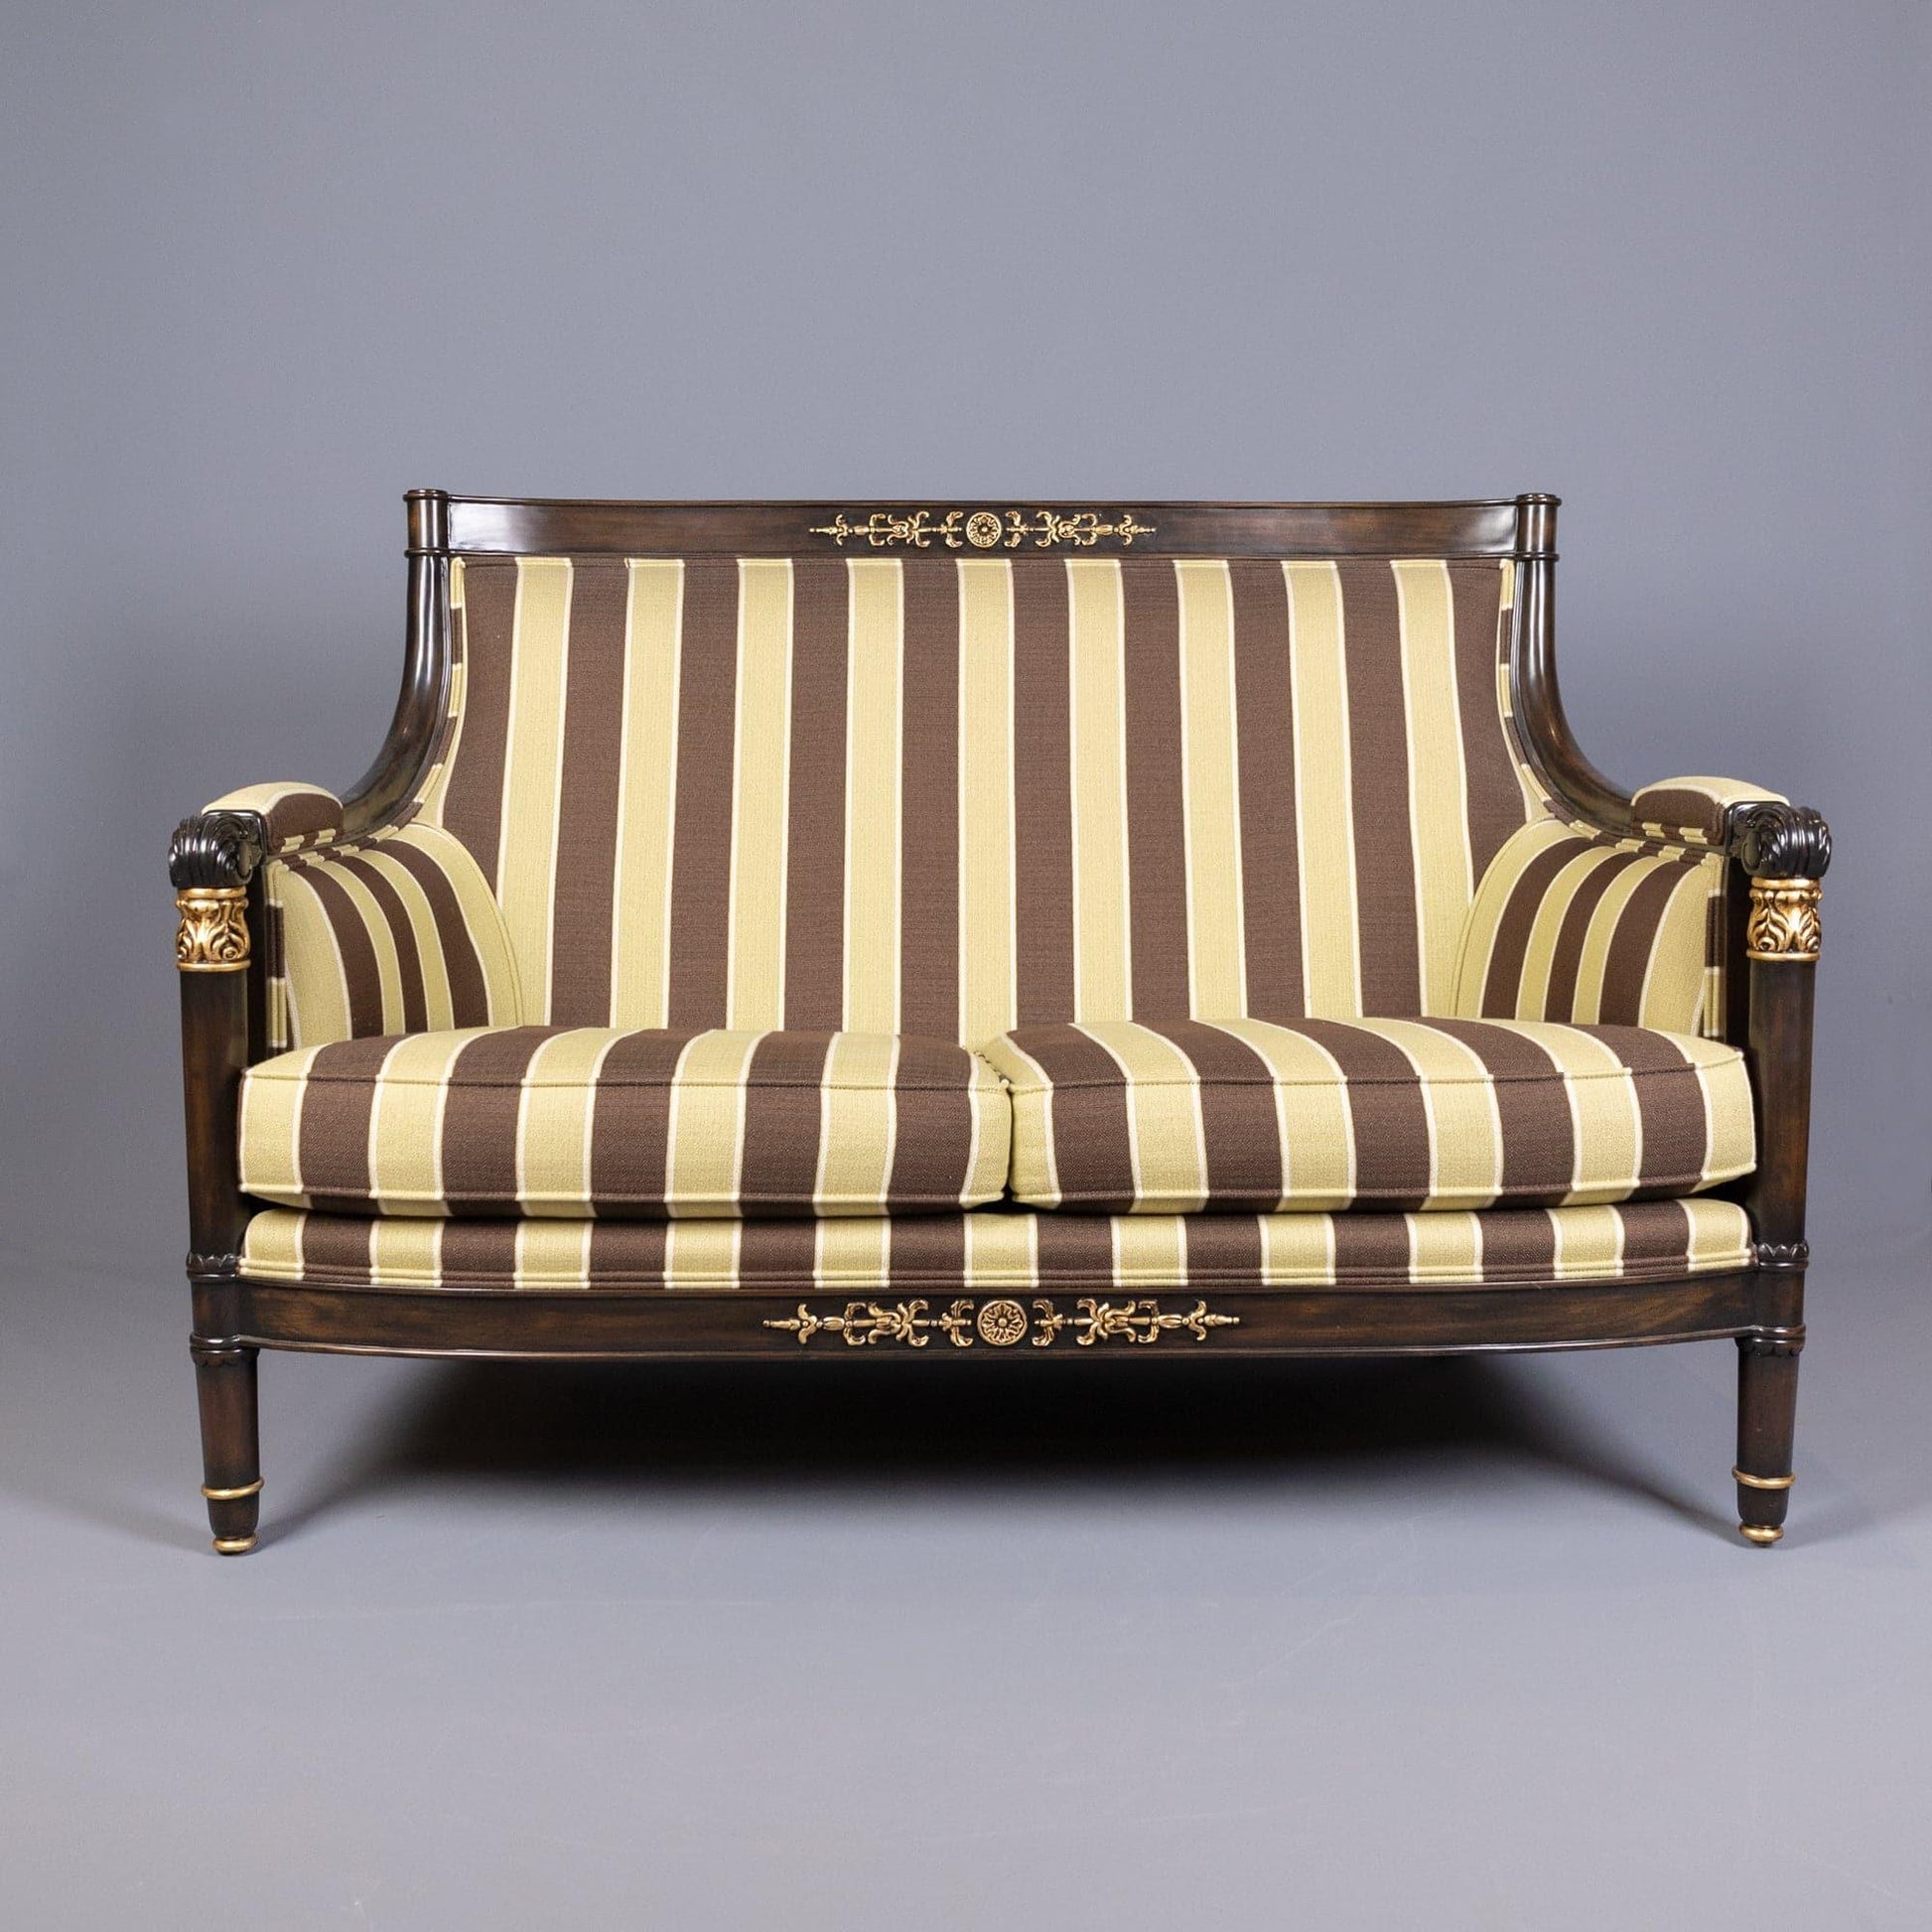 NEOPOLITAN DIRECTOIRE LOVESEAT - House of Chippendale